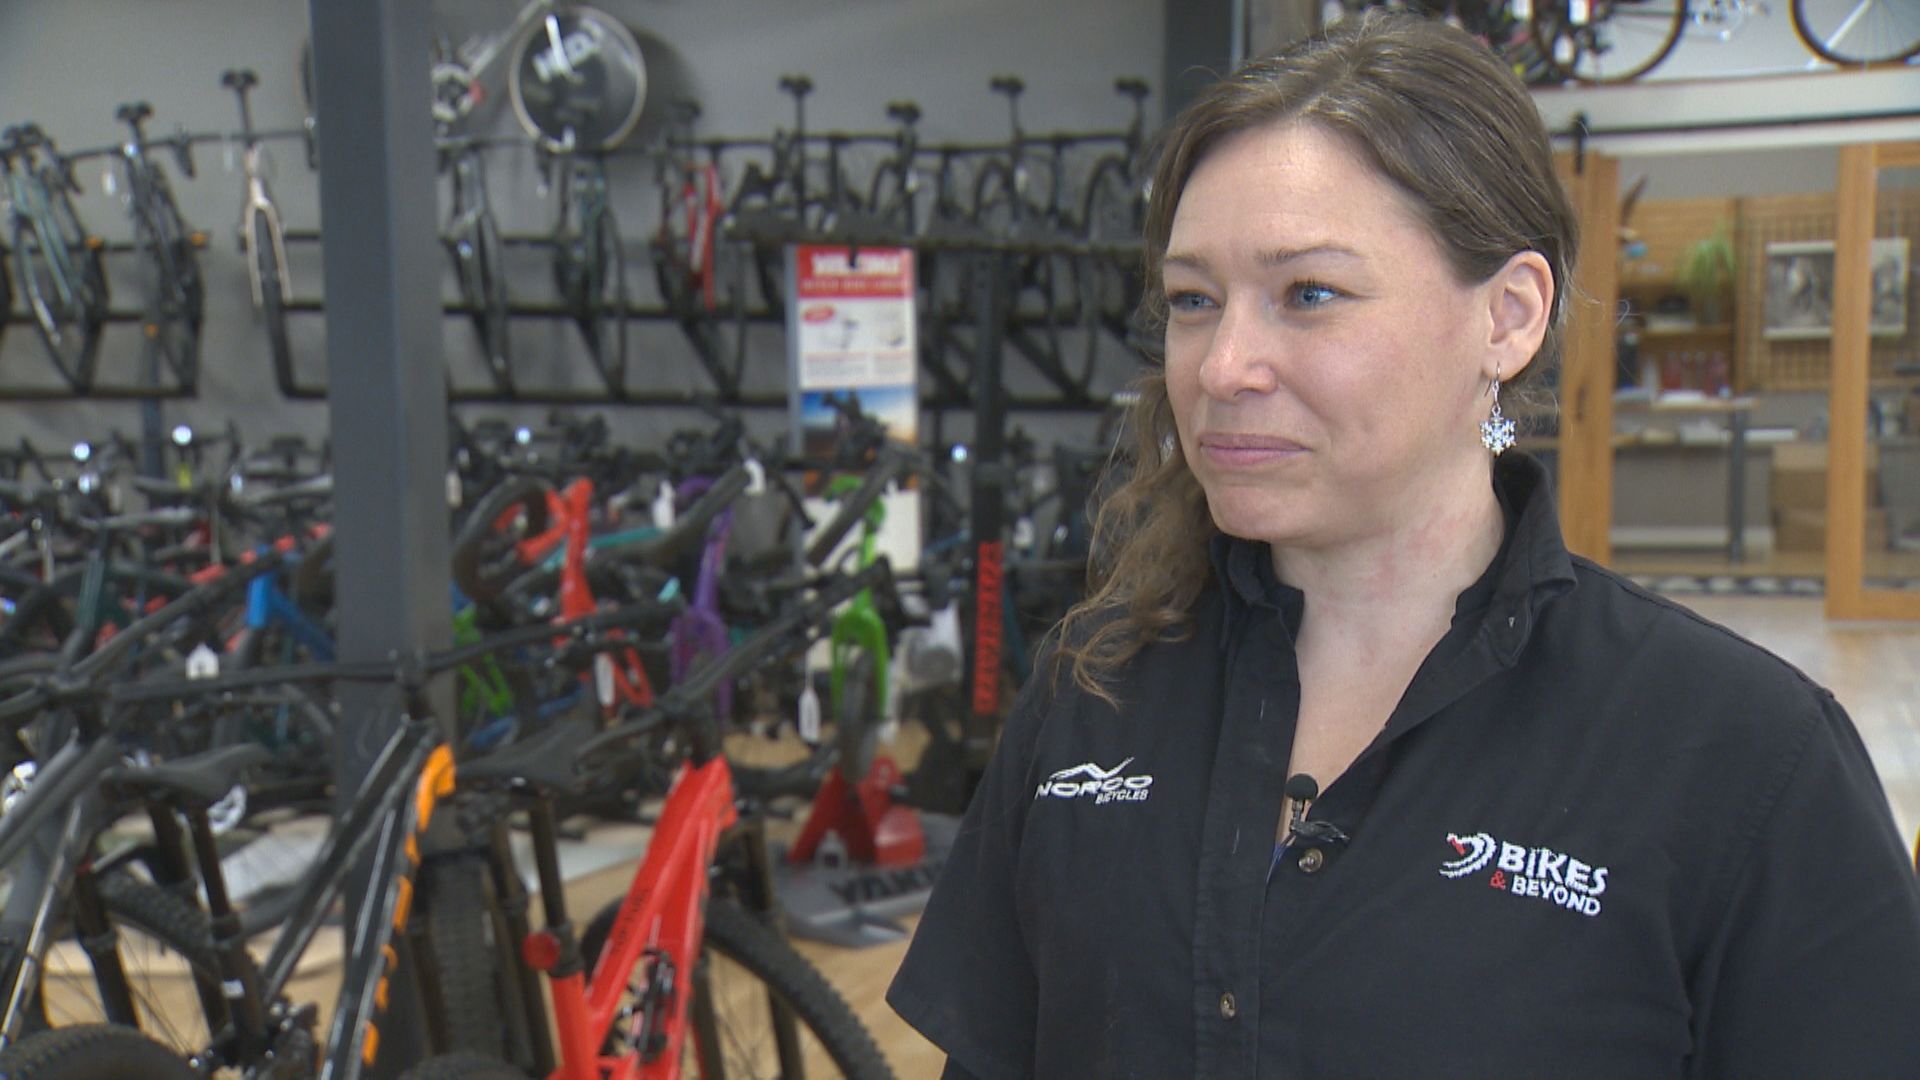 Winnipeg cyclist sees importance in the city’s push to improve bike routes downtown